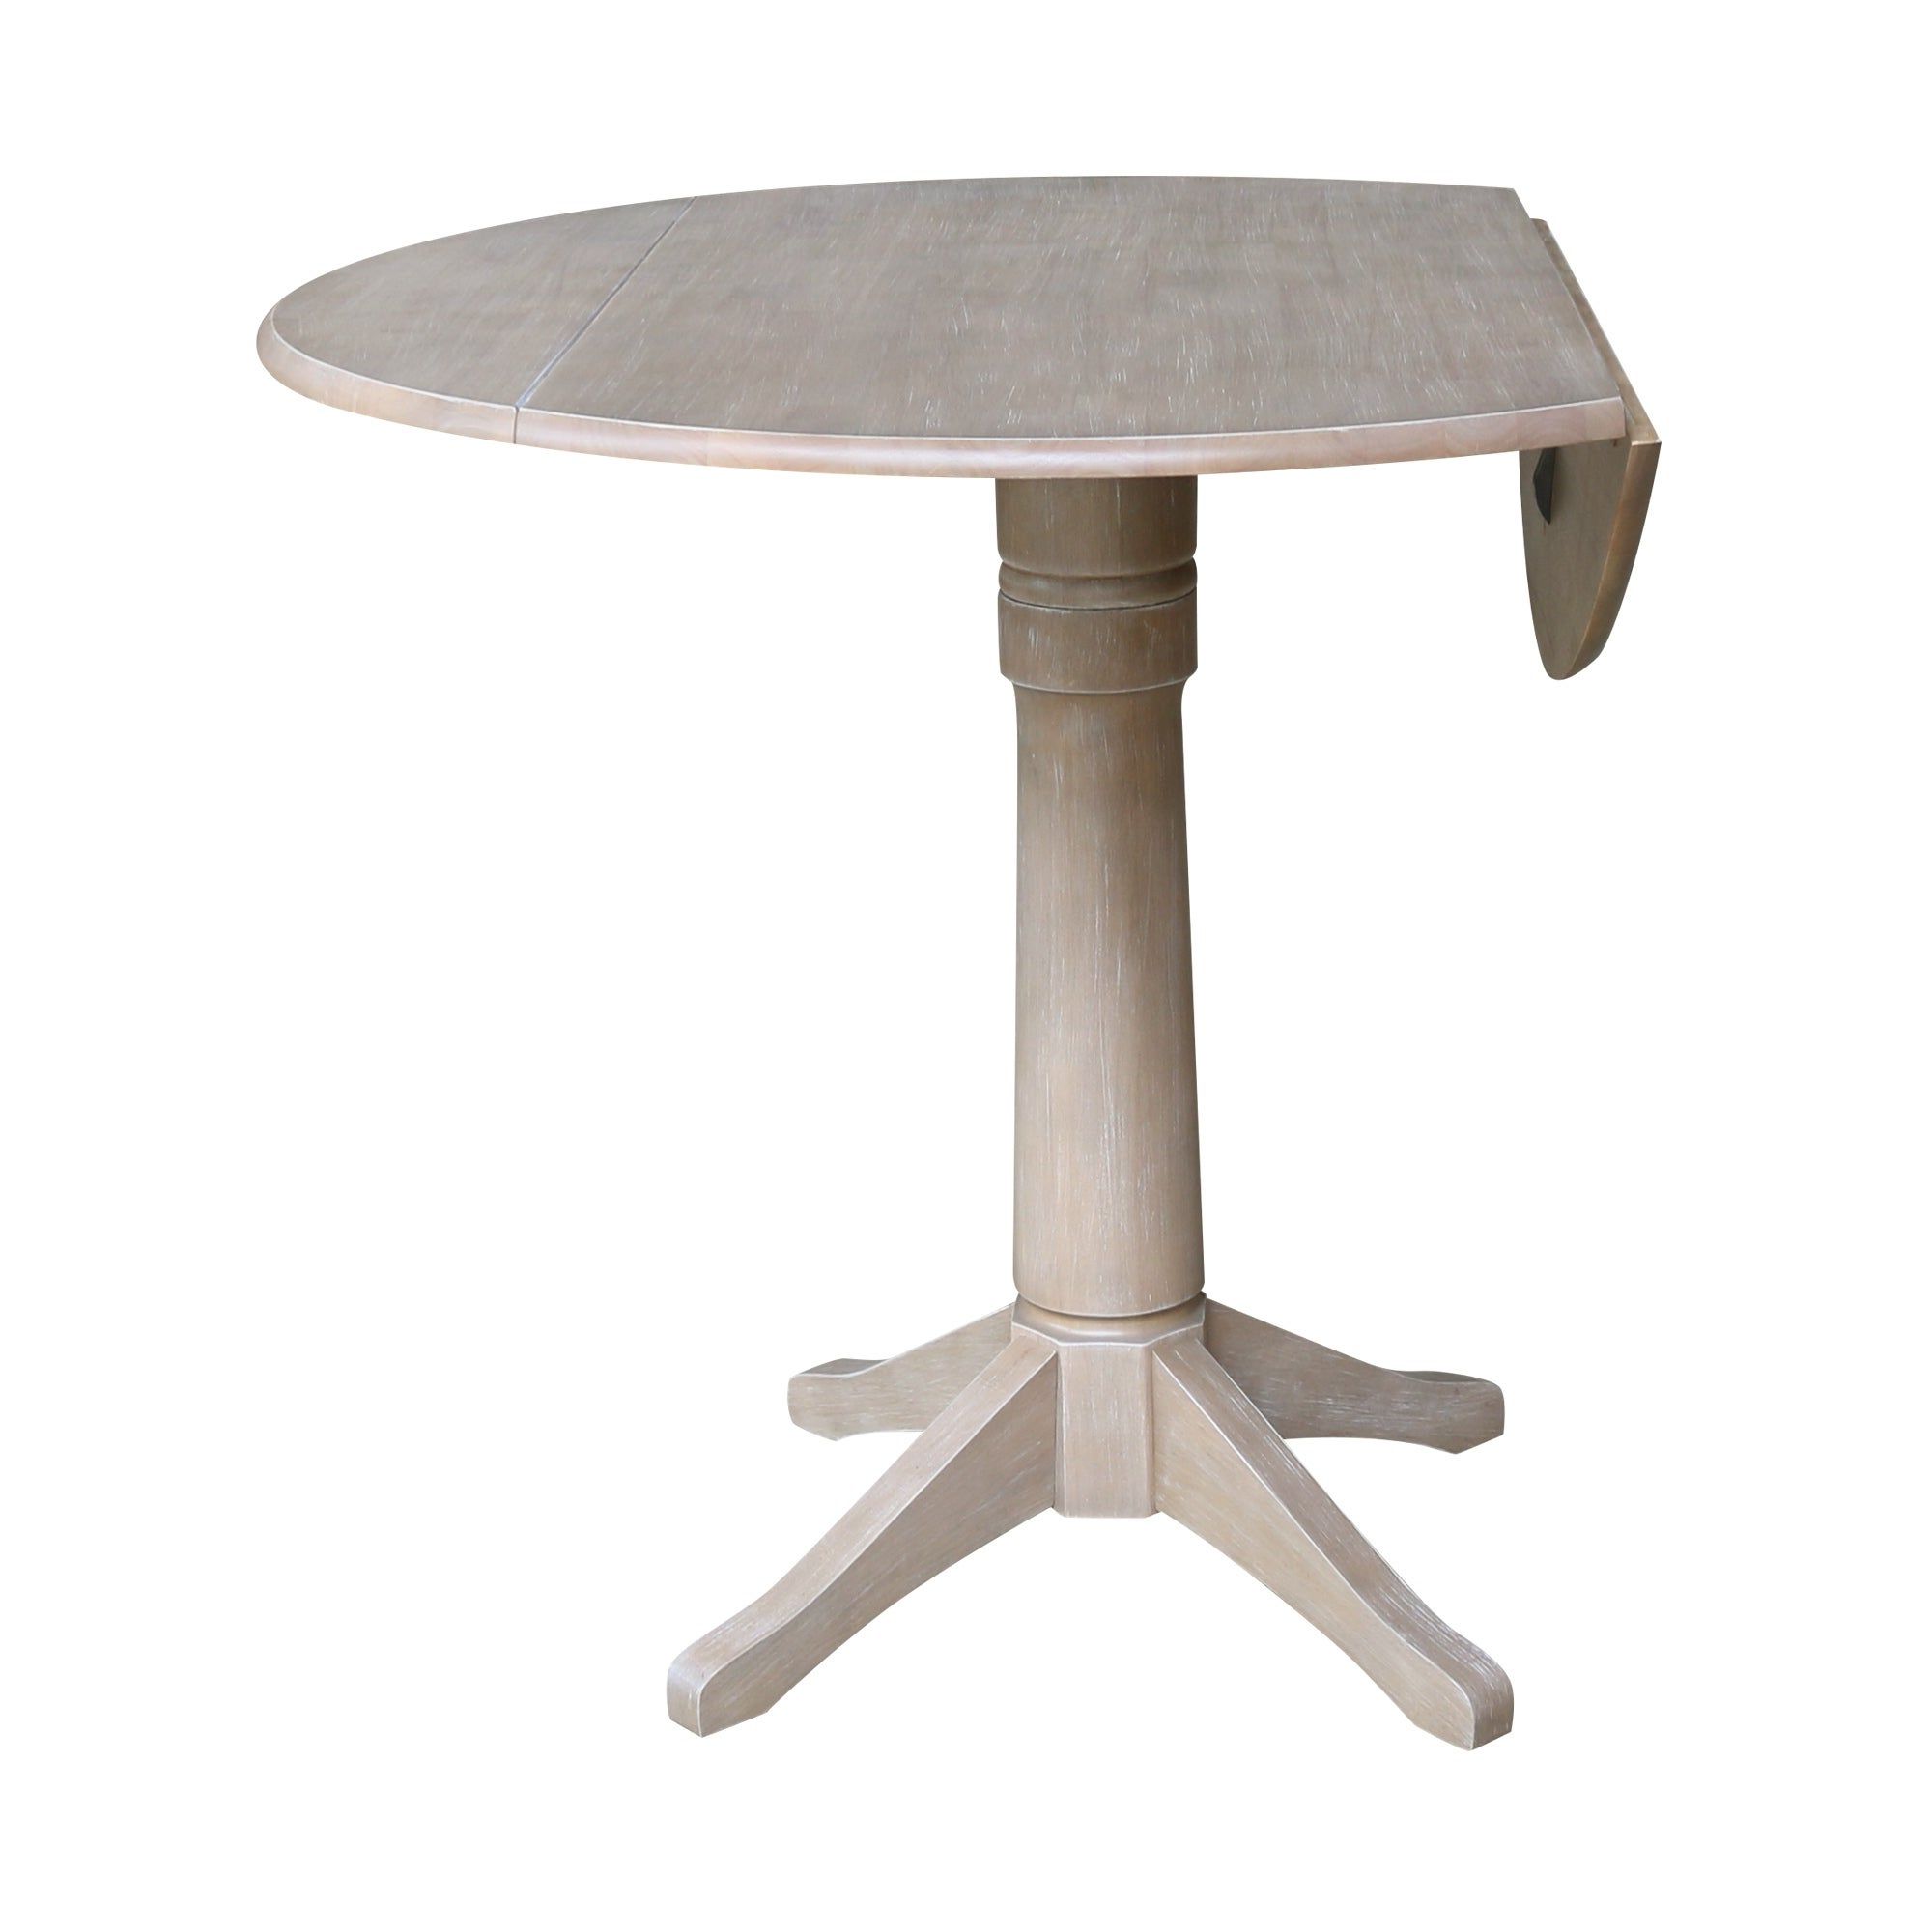 Ebay Pertaining To Most Popular Round Dual Drop Leaf Pedestal Tables (View 8 of 15)